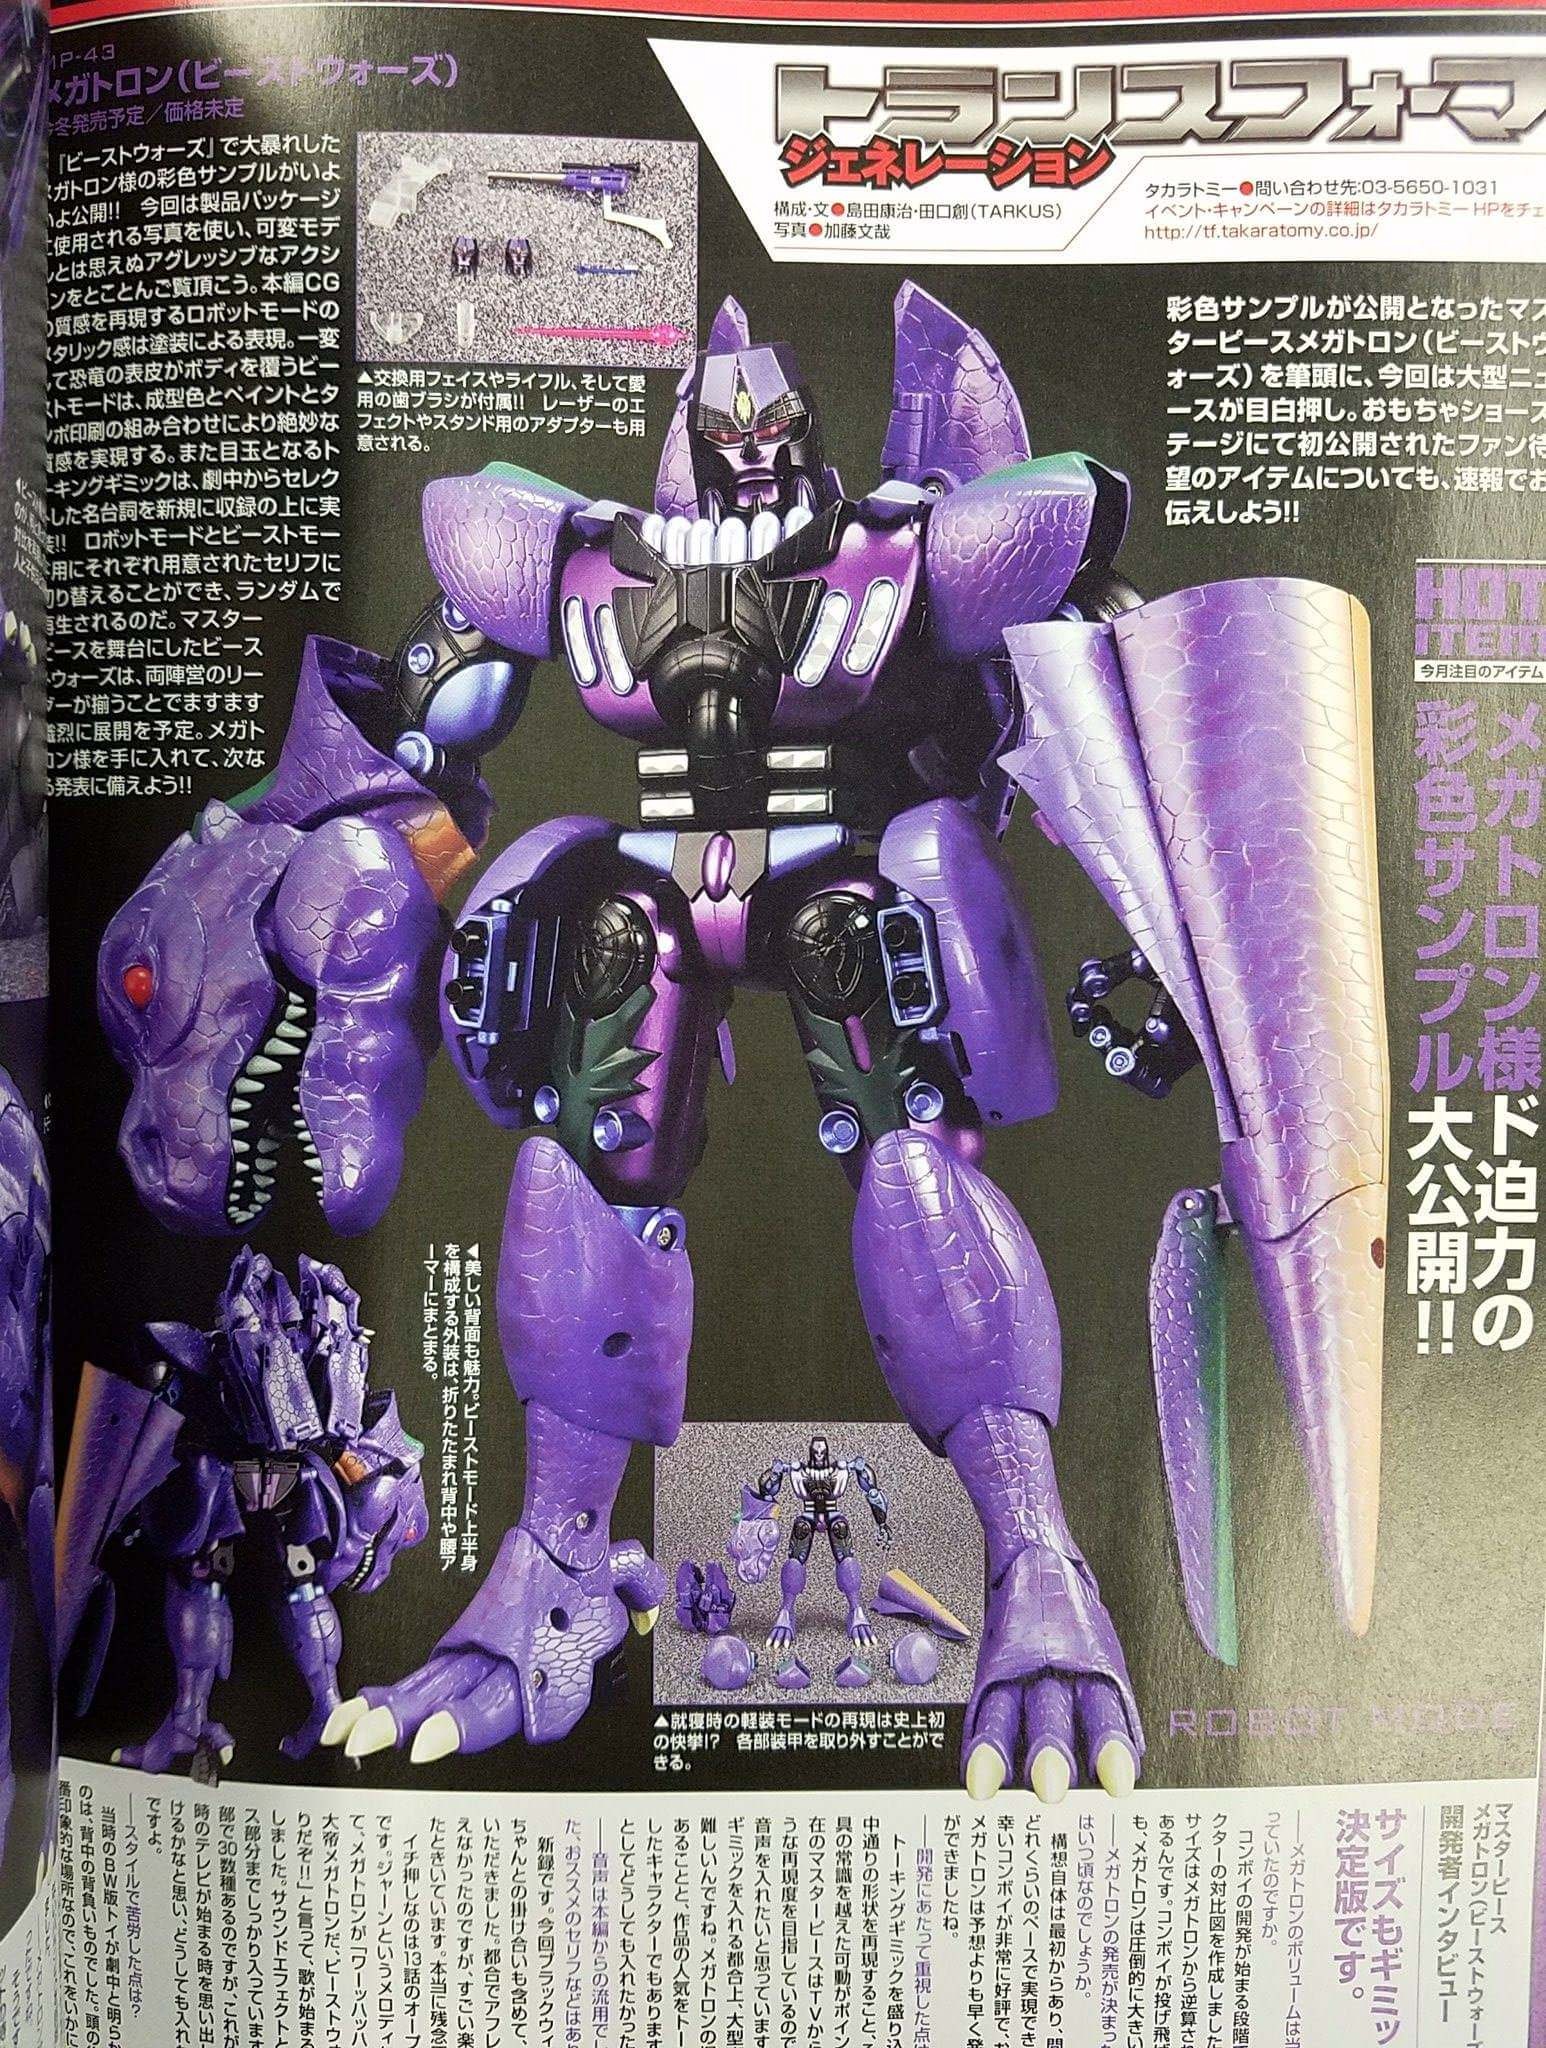 Transformers News: New Colour Images of Takara Tomy Transformers Masterpiece MP-43 Beast Wars Megatron and Features